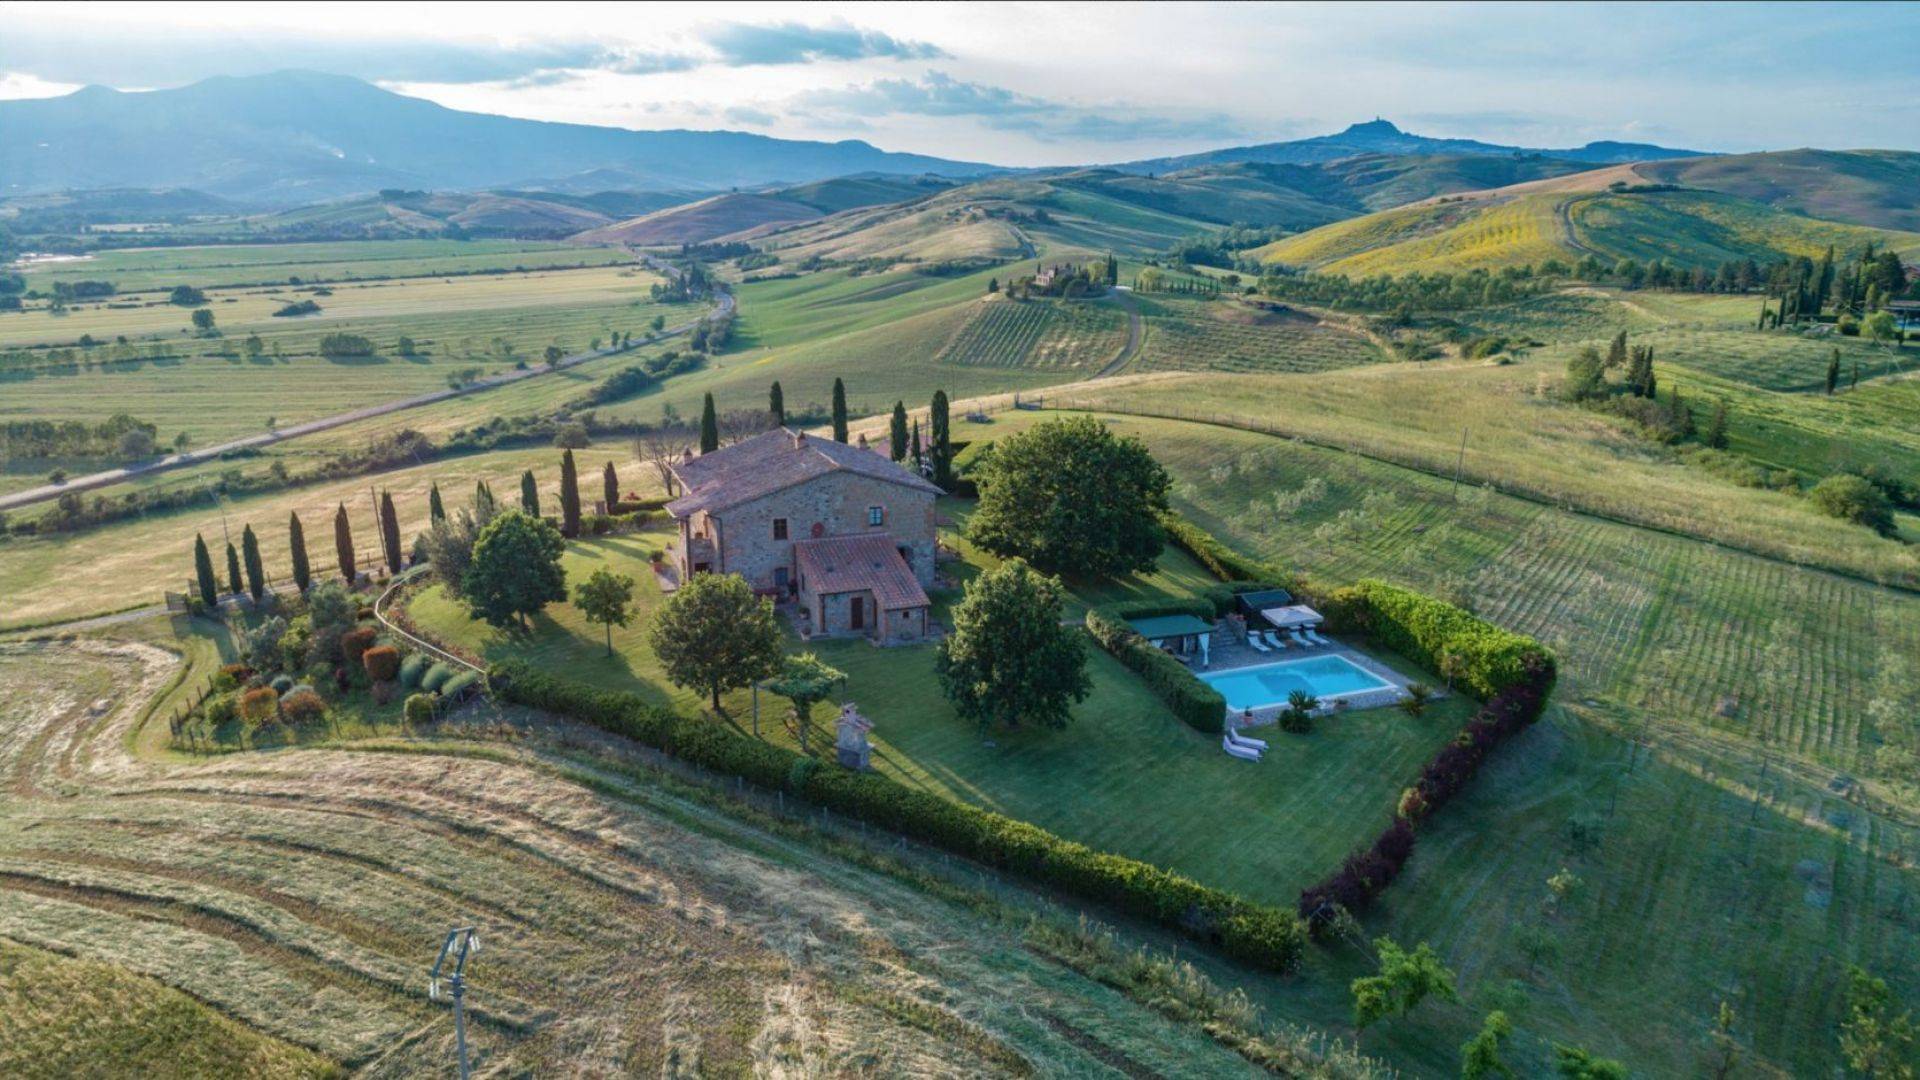 Completely renovated elegant stone country villa with swimming pool and garden for sale in San Casciano dei Bagni, Siena.